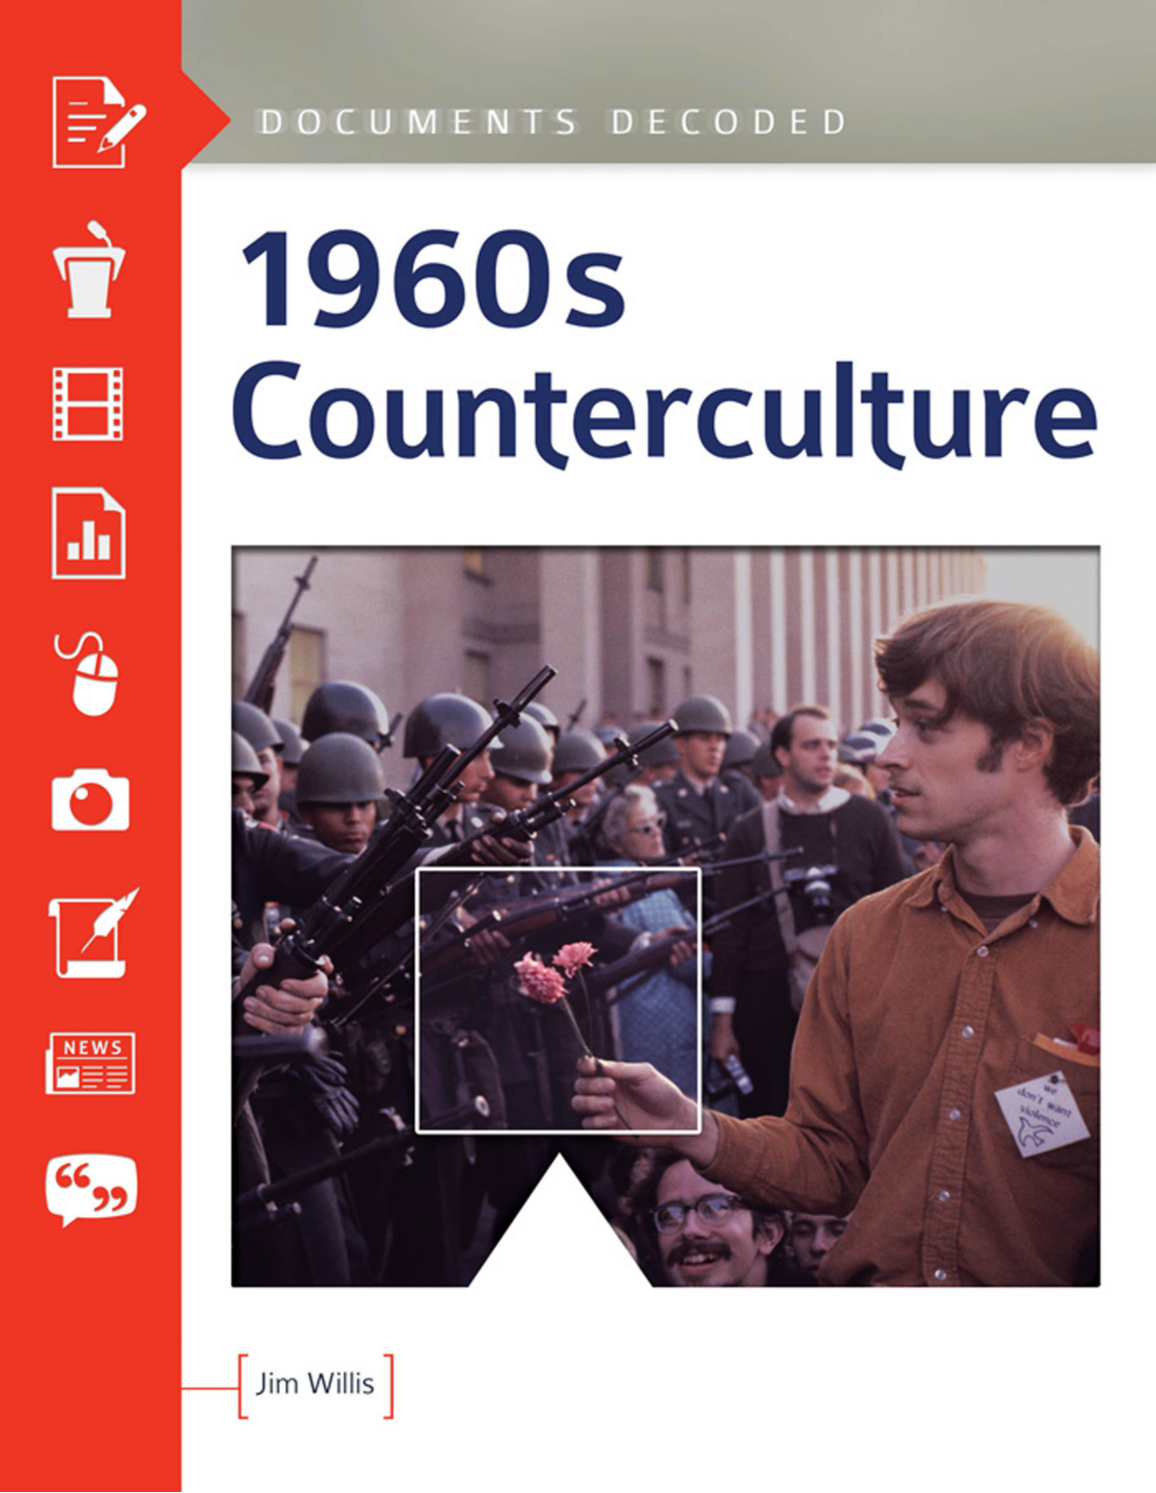 1960s Counterculture: Documents Decoded page Cover1